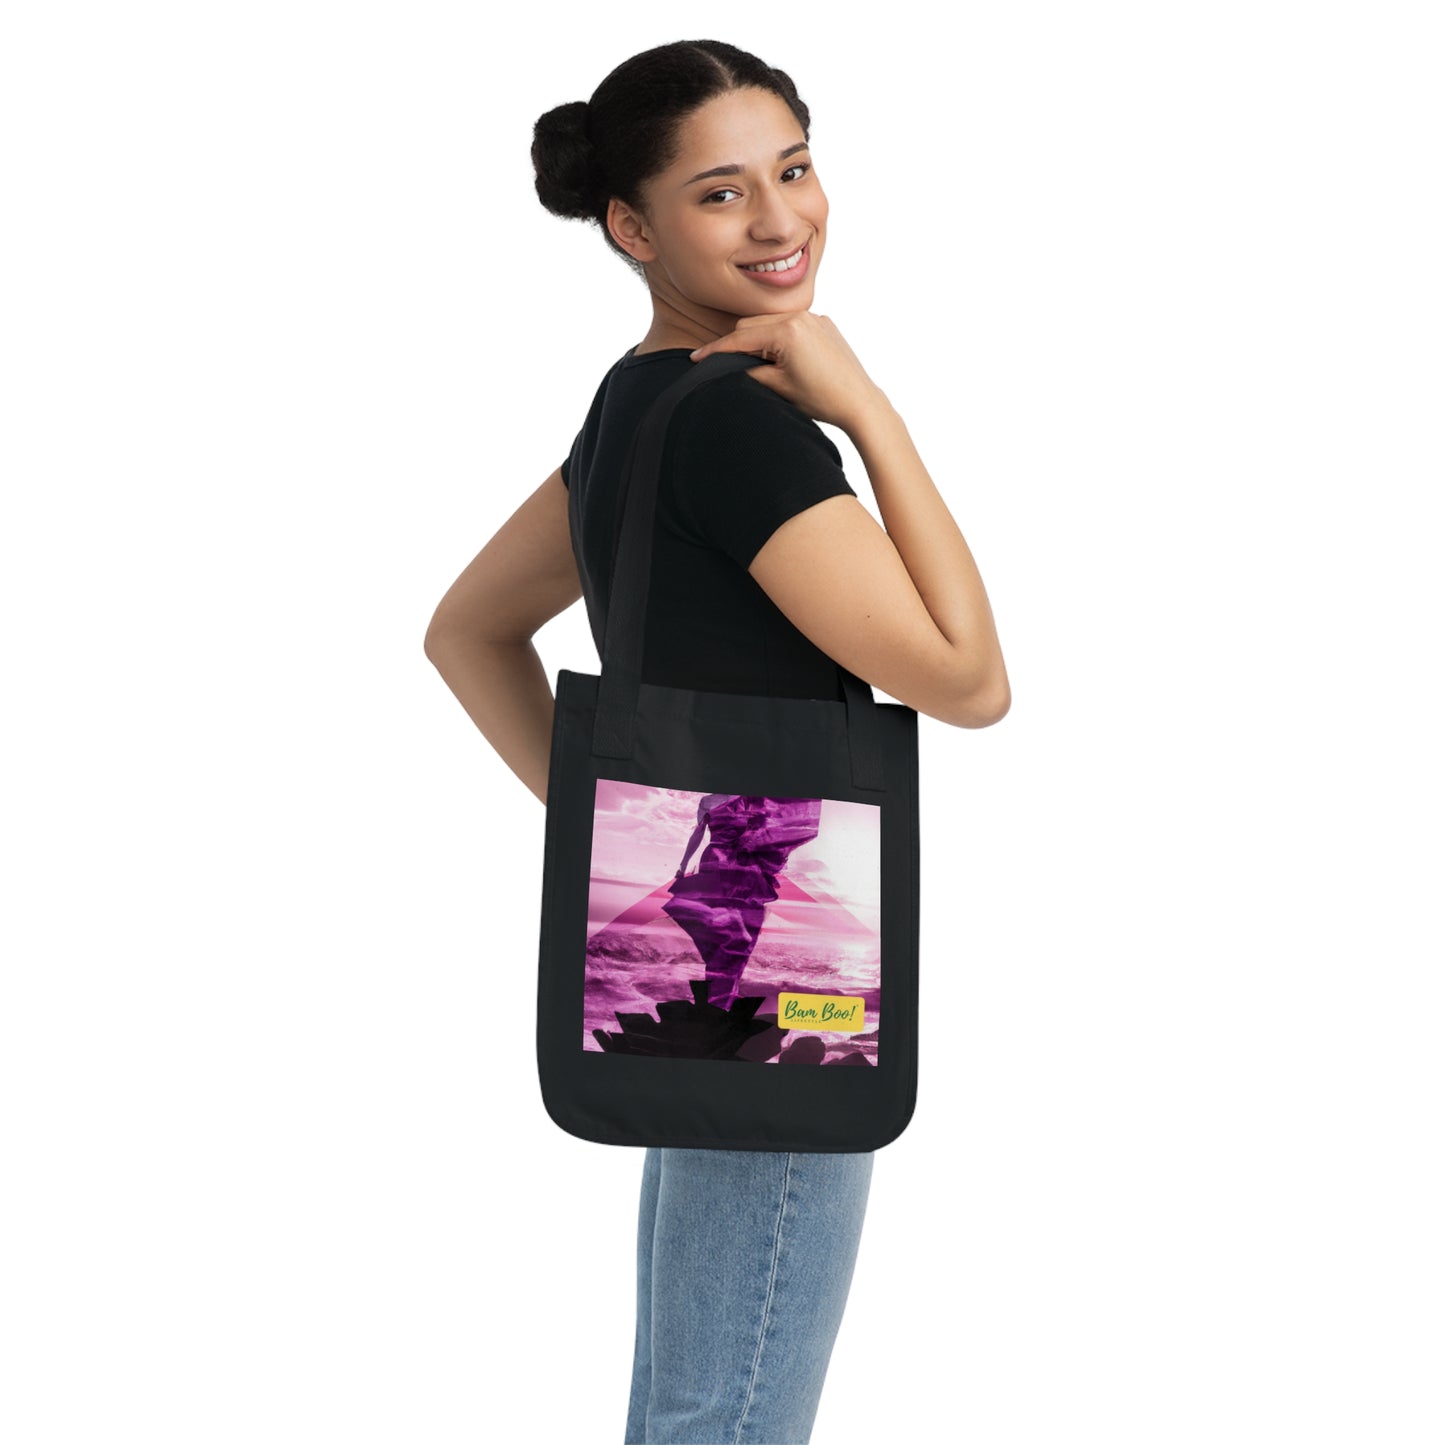 "The Timeless Mosaic" - Bam Boo! Lifestyle Eco-friendly Tote Bag